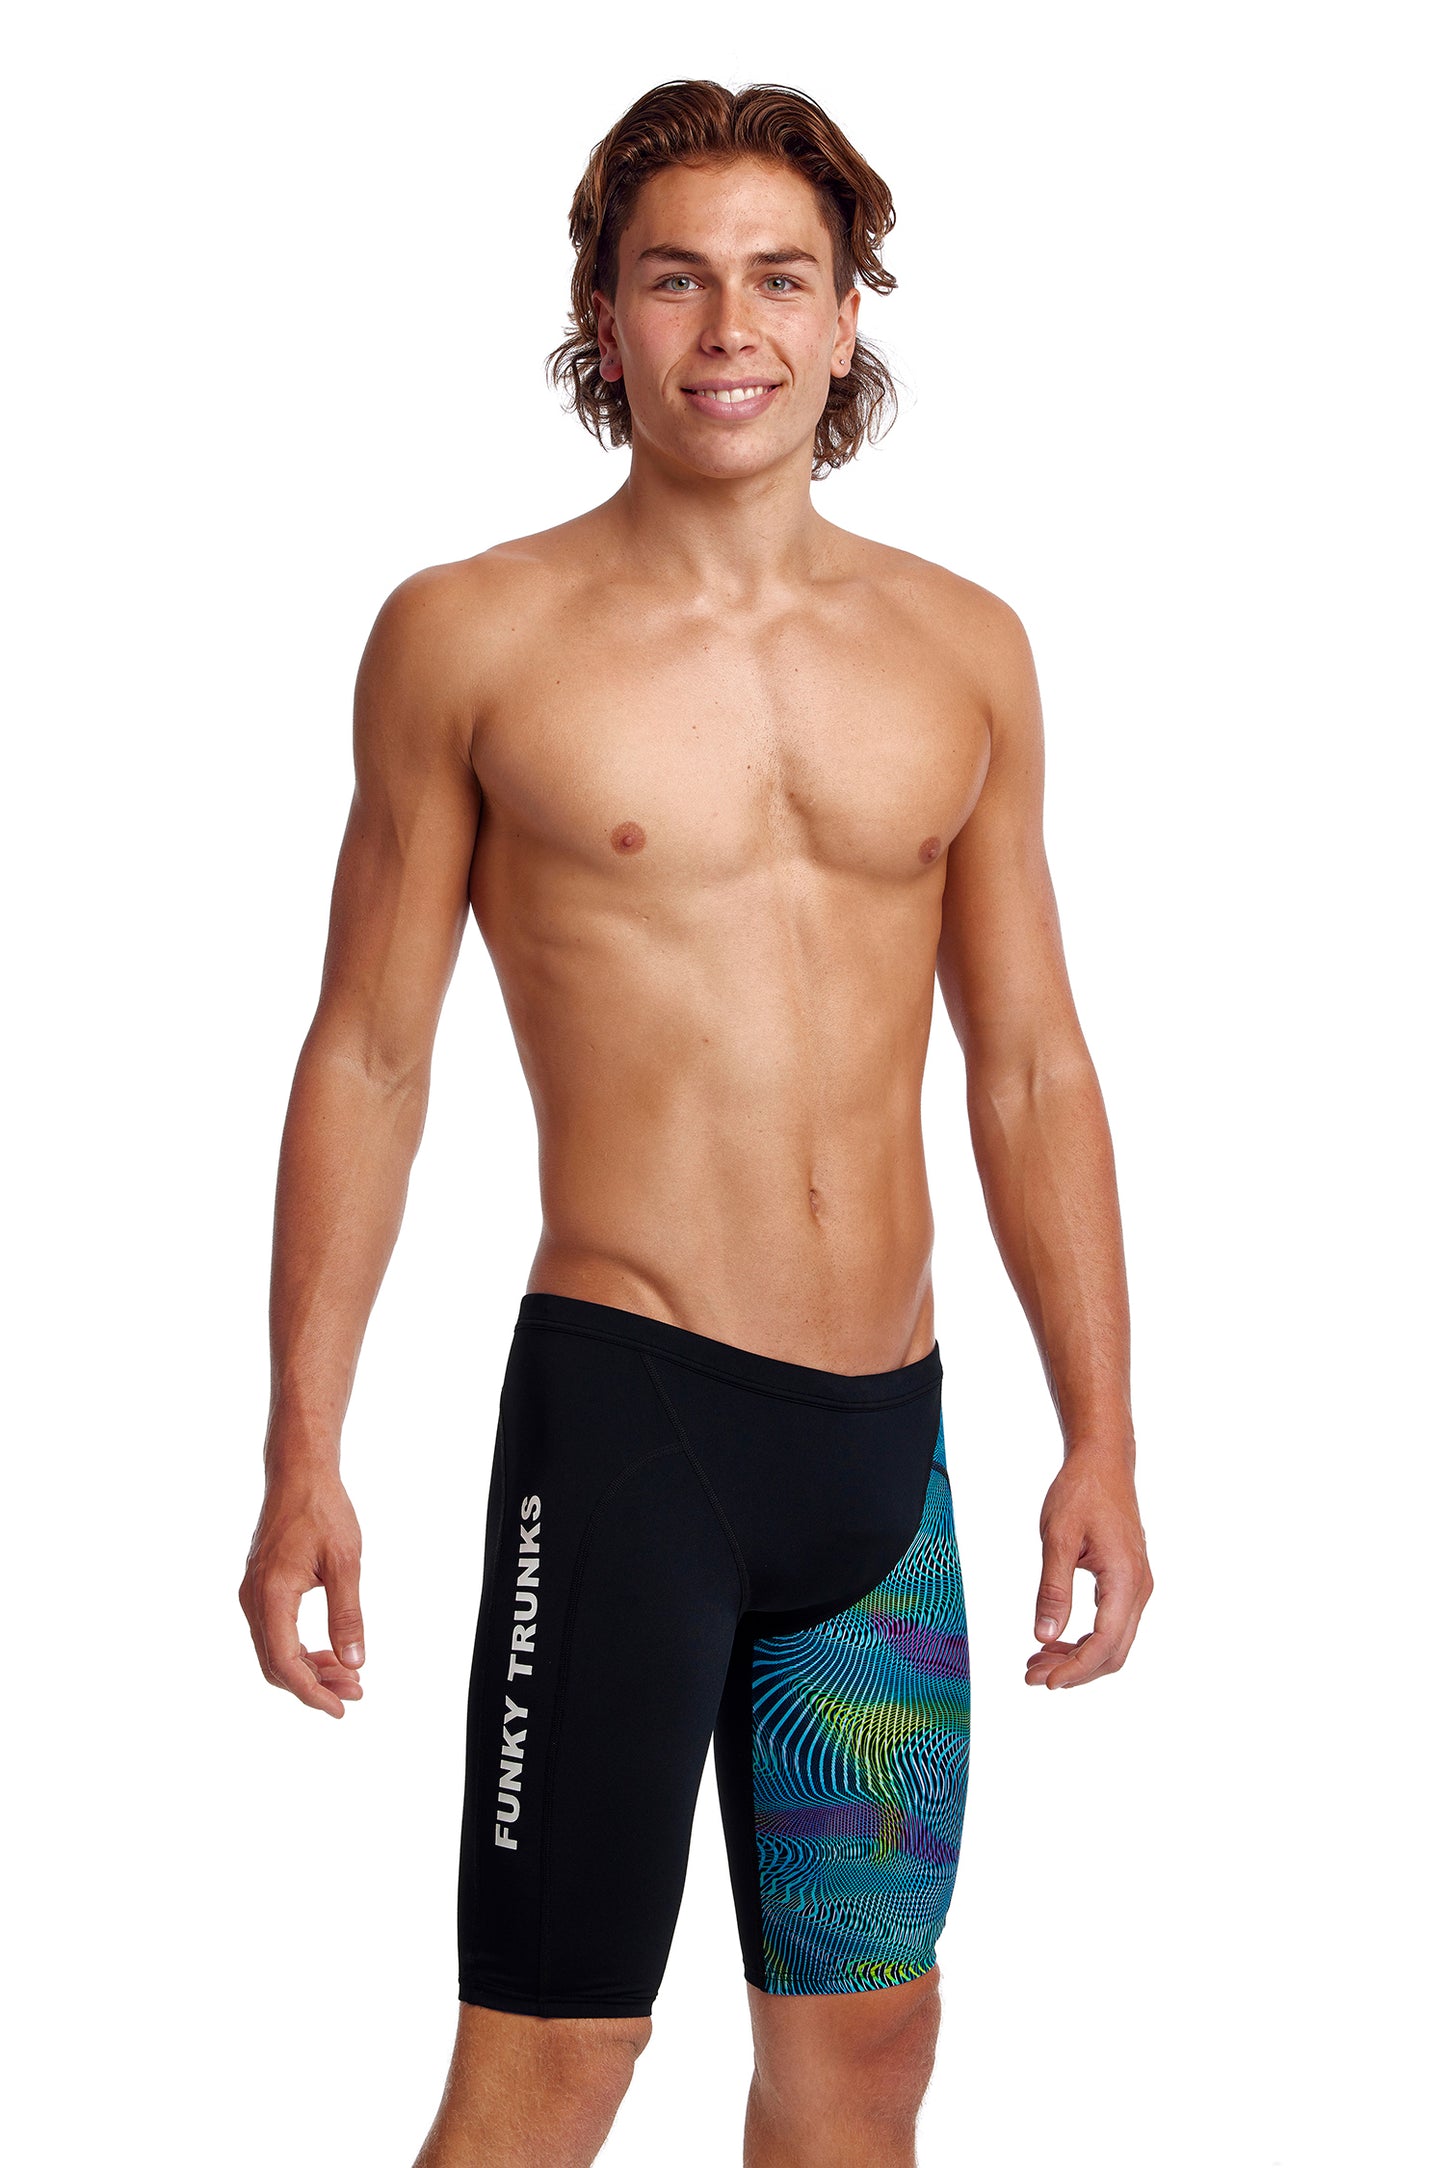 Funky Trunks Mens Training Jammers Wires Crossed